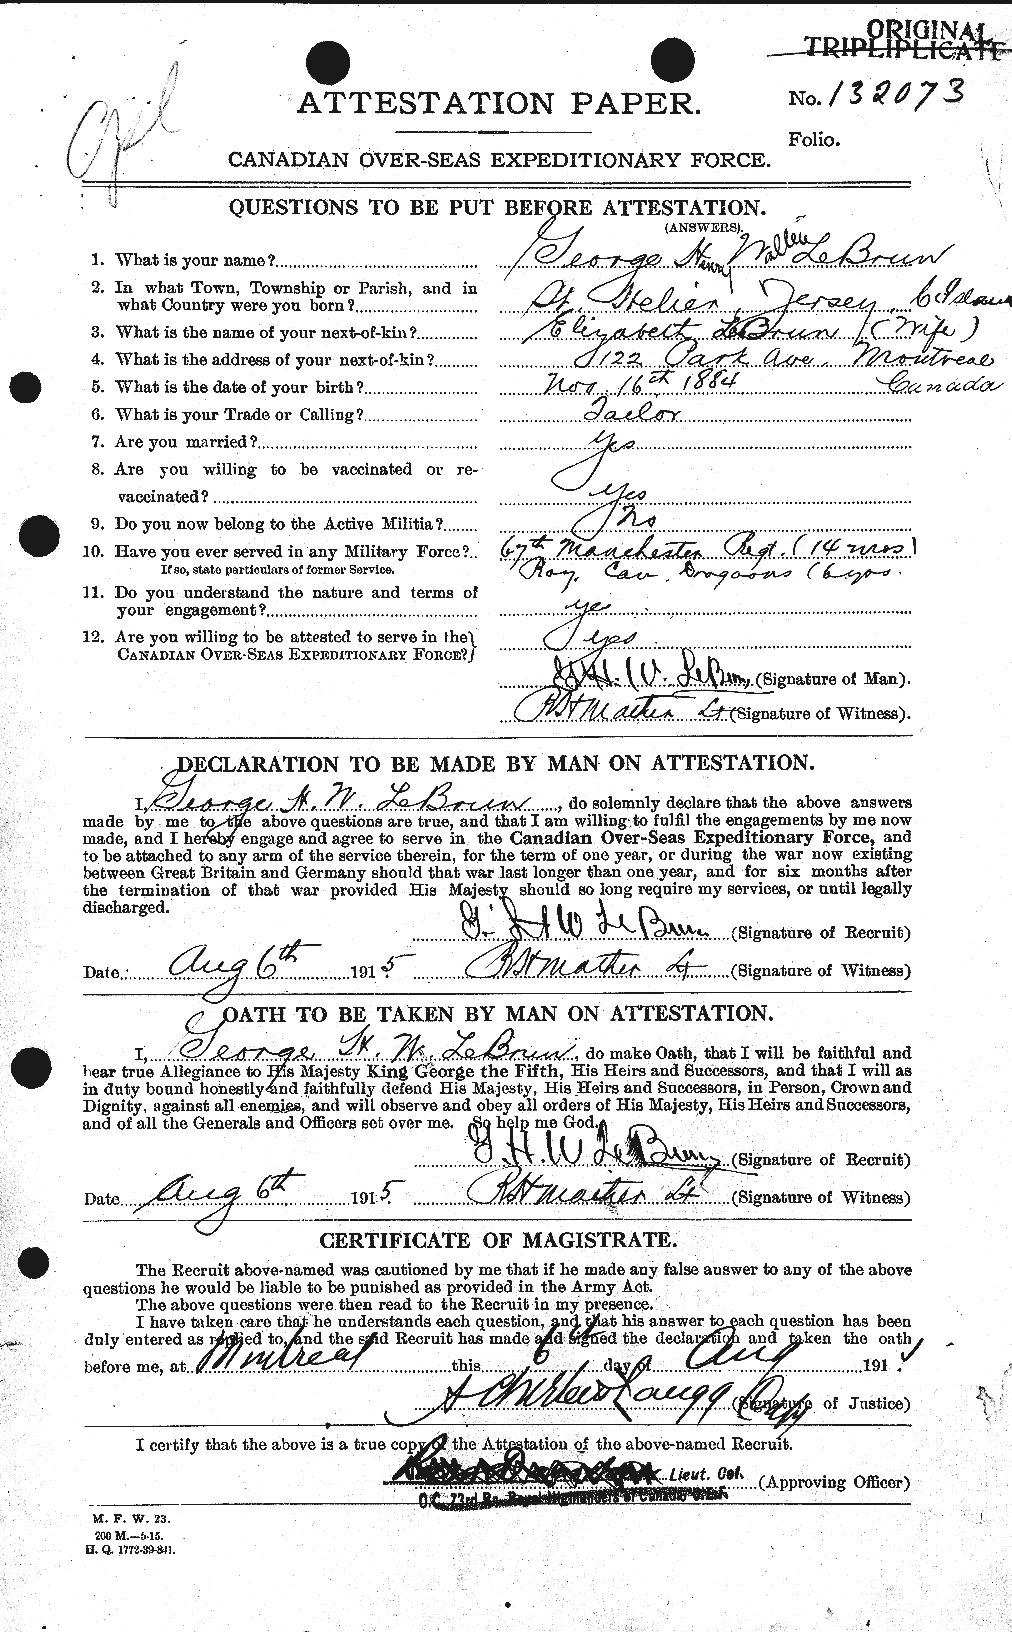 Personnel Records of the First World War - CEF 461562a